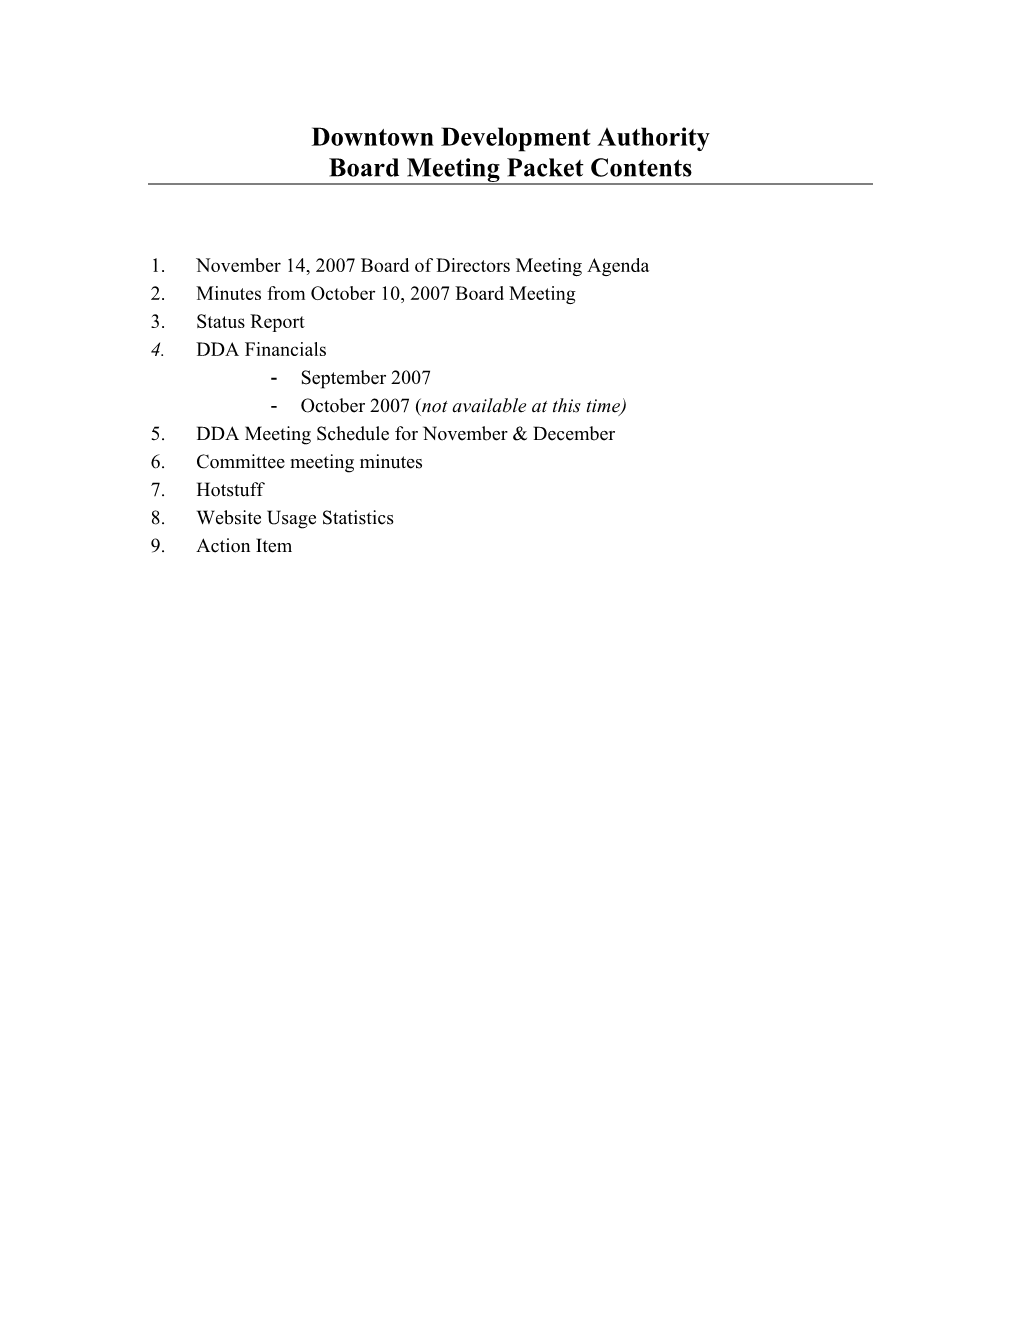 Downtown Development Authority Board Meeting Packet Contents